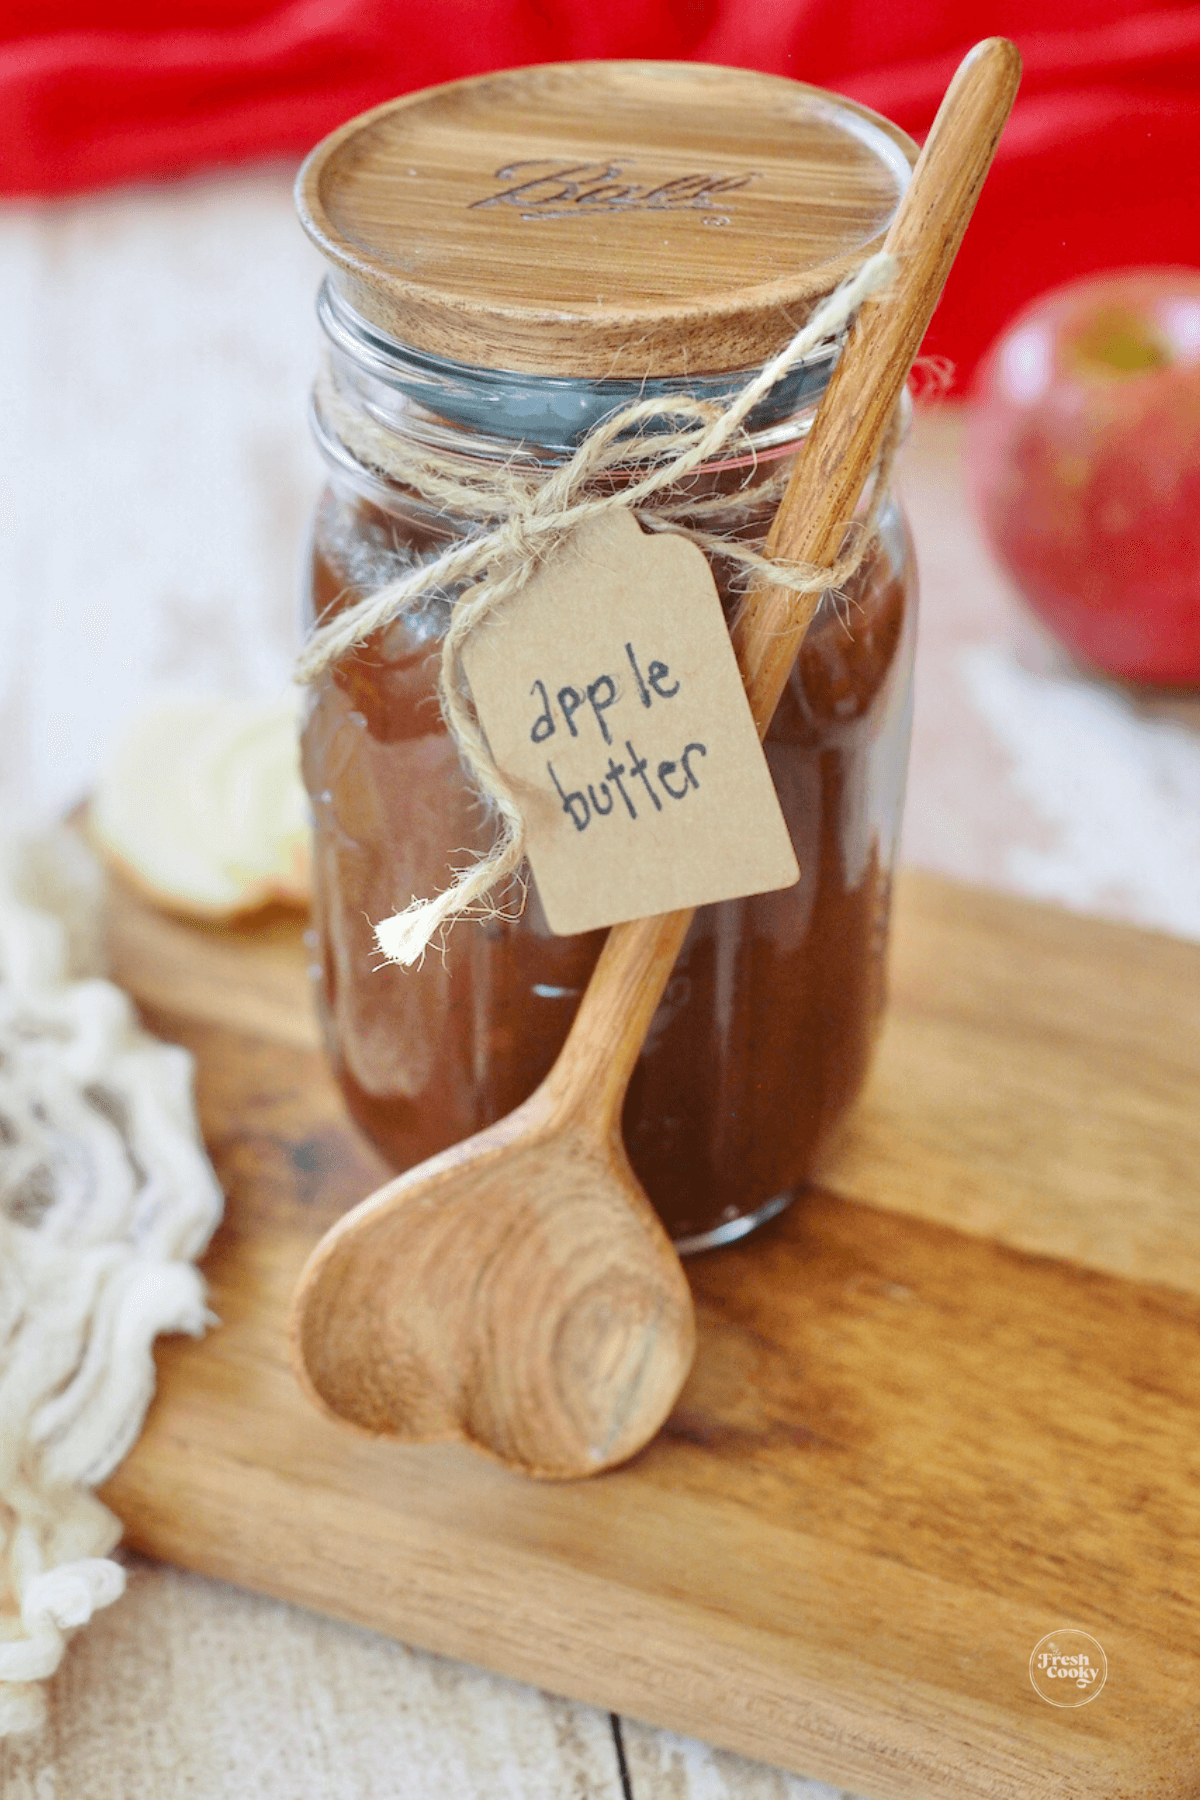 Jarred apple butter with label and cute spoon.